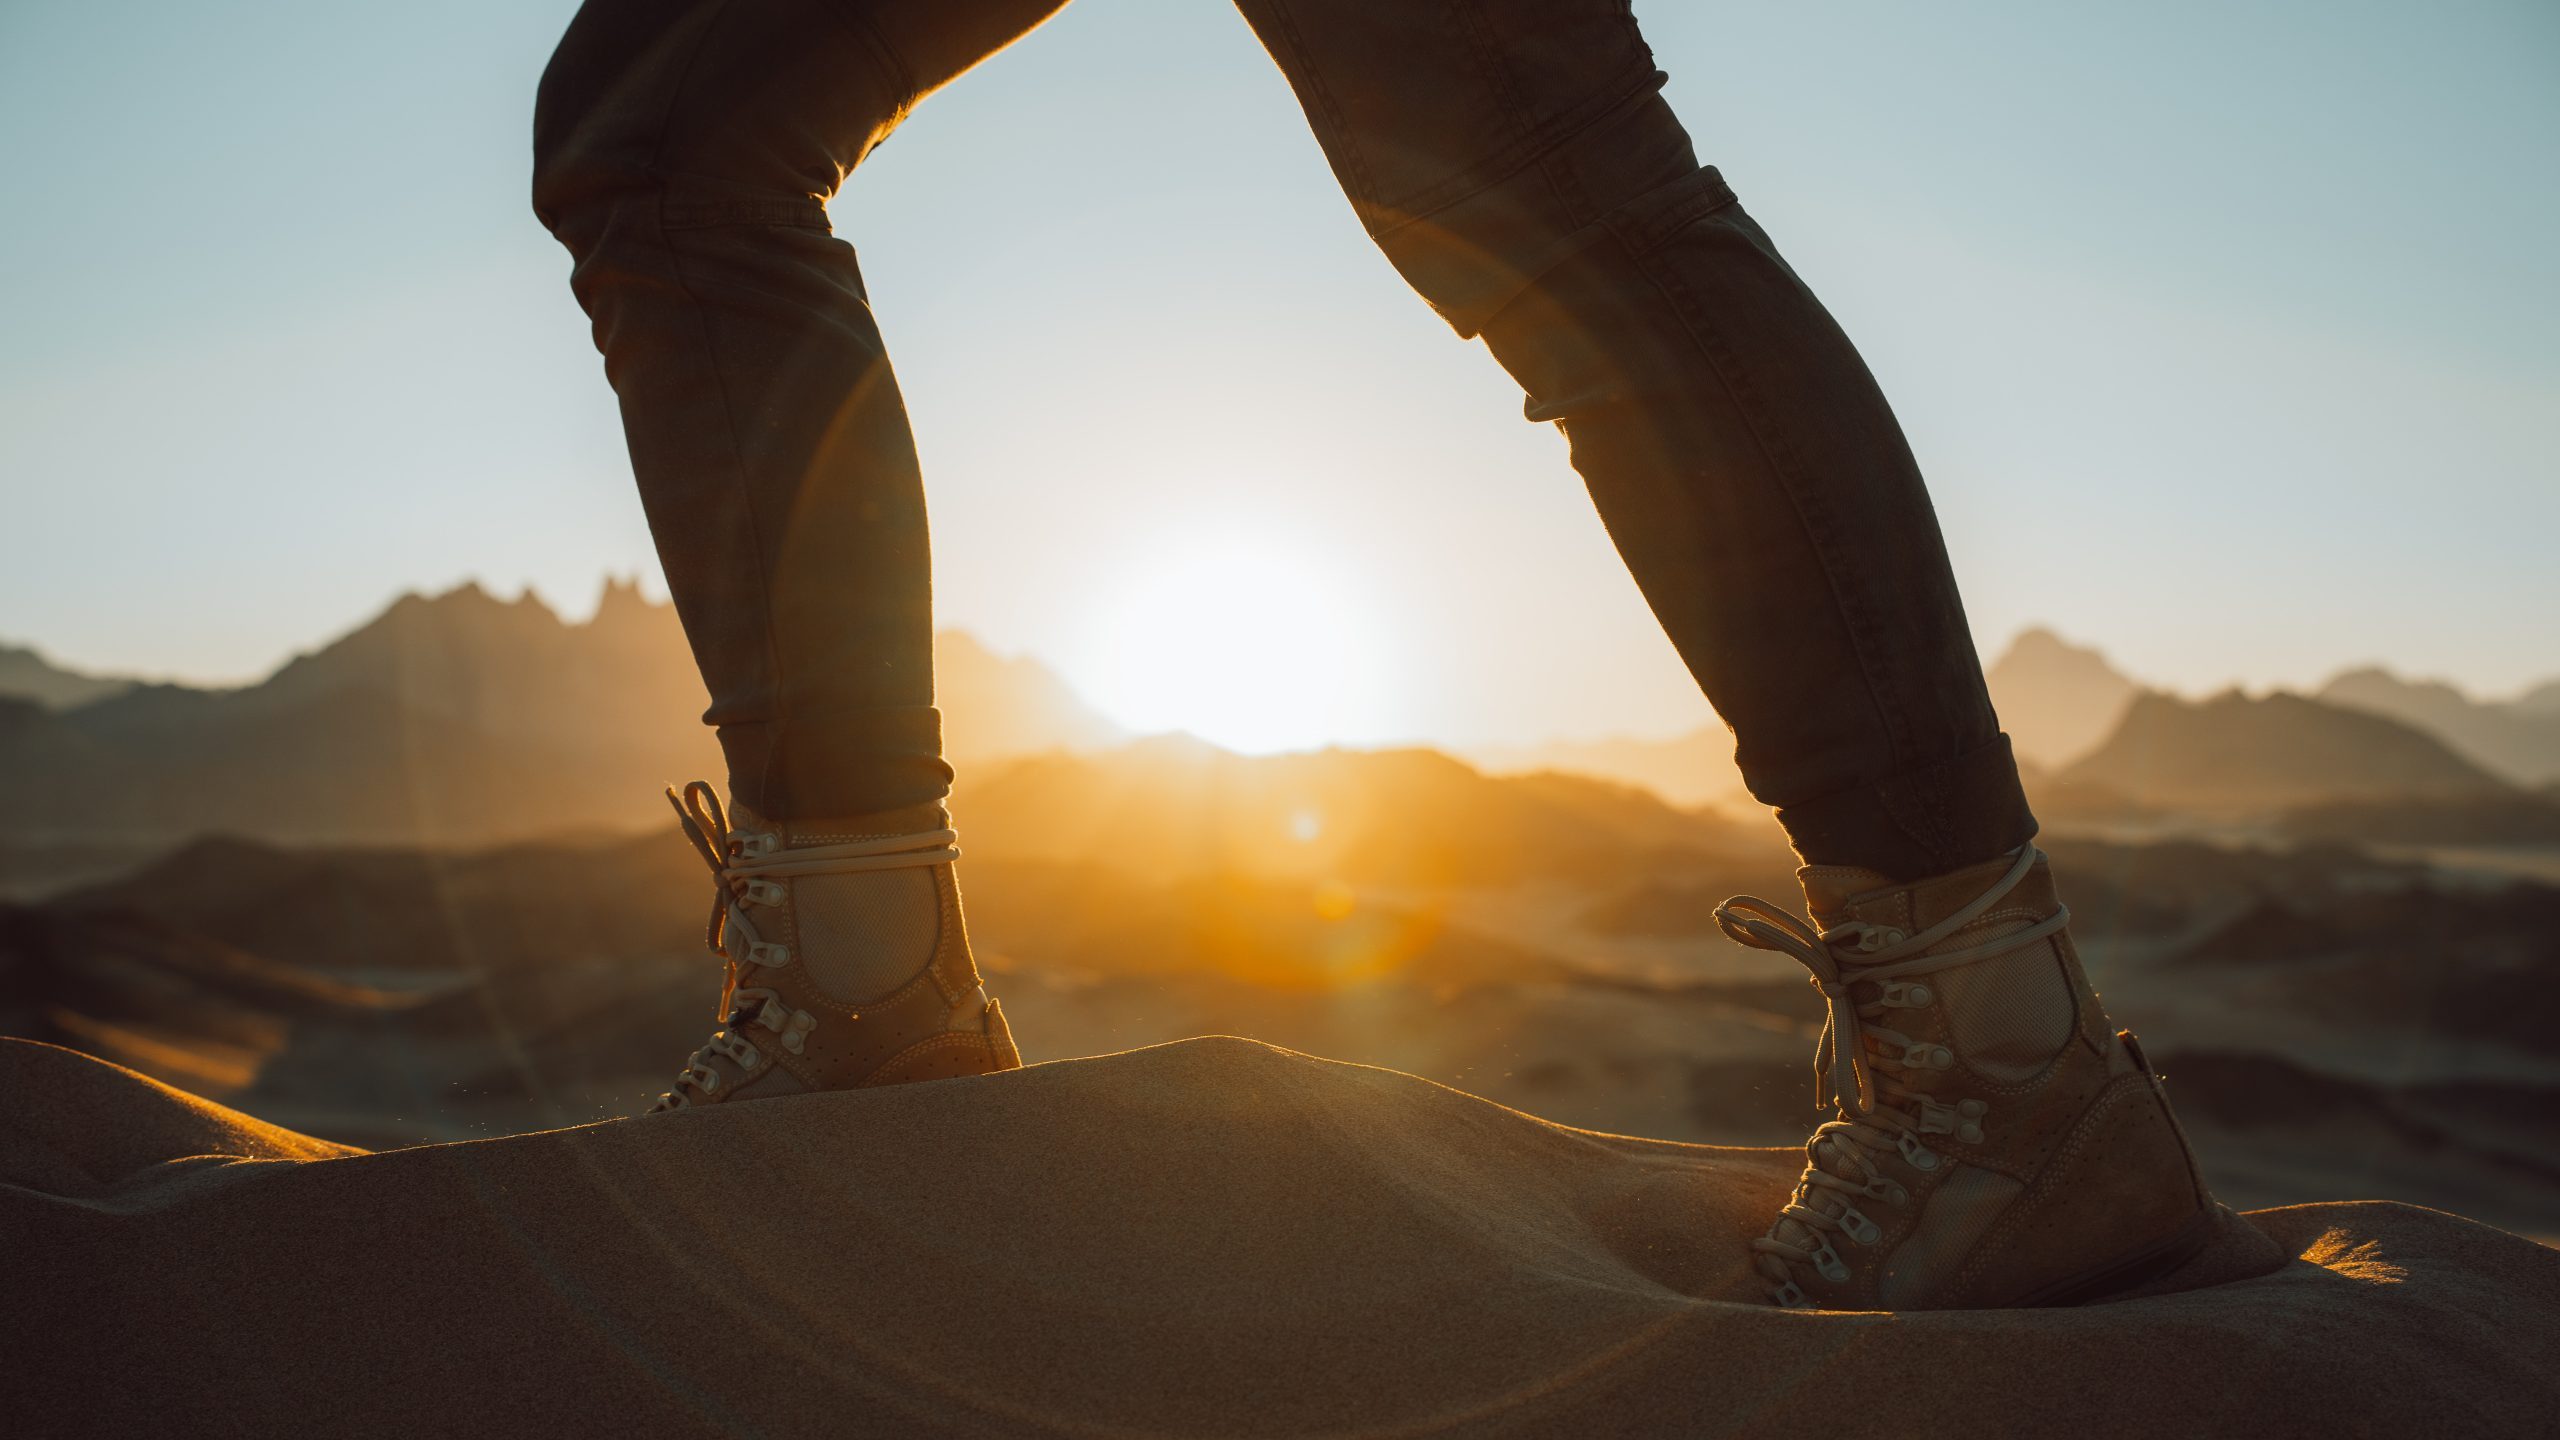 A close-up of a person's legs and hiking boots as they walk through desert sand in Saudi Arabia. In the background is the rising sun.